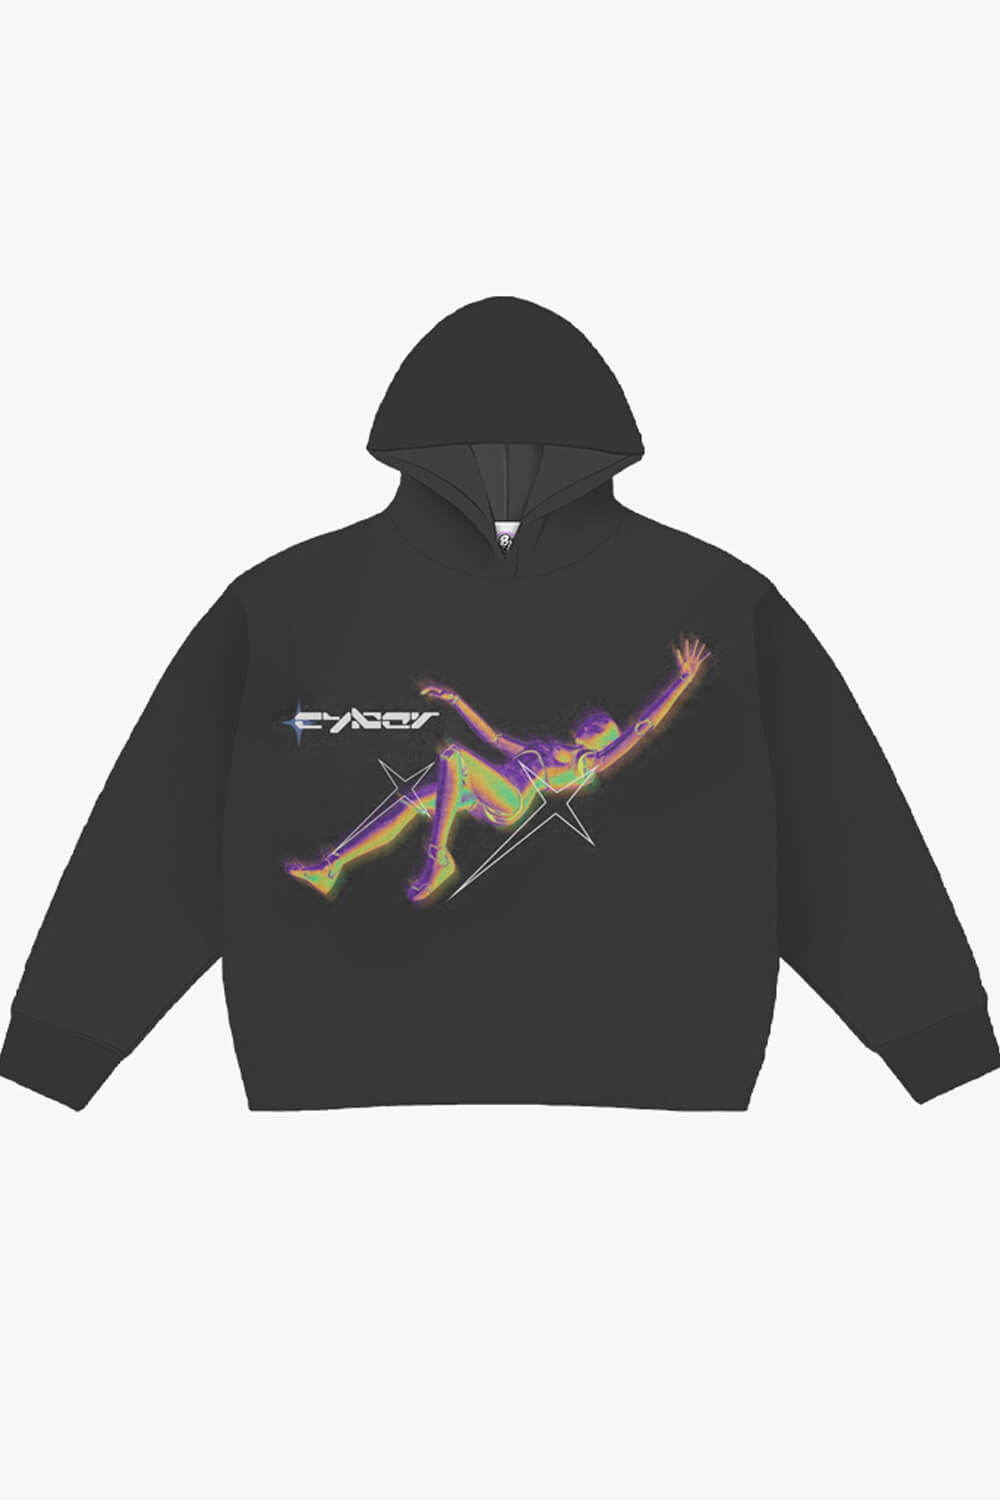 Cyber Falling Futuristic Y2K Hoodie - Aesthetic Clothes Shop